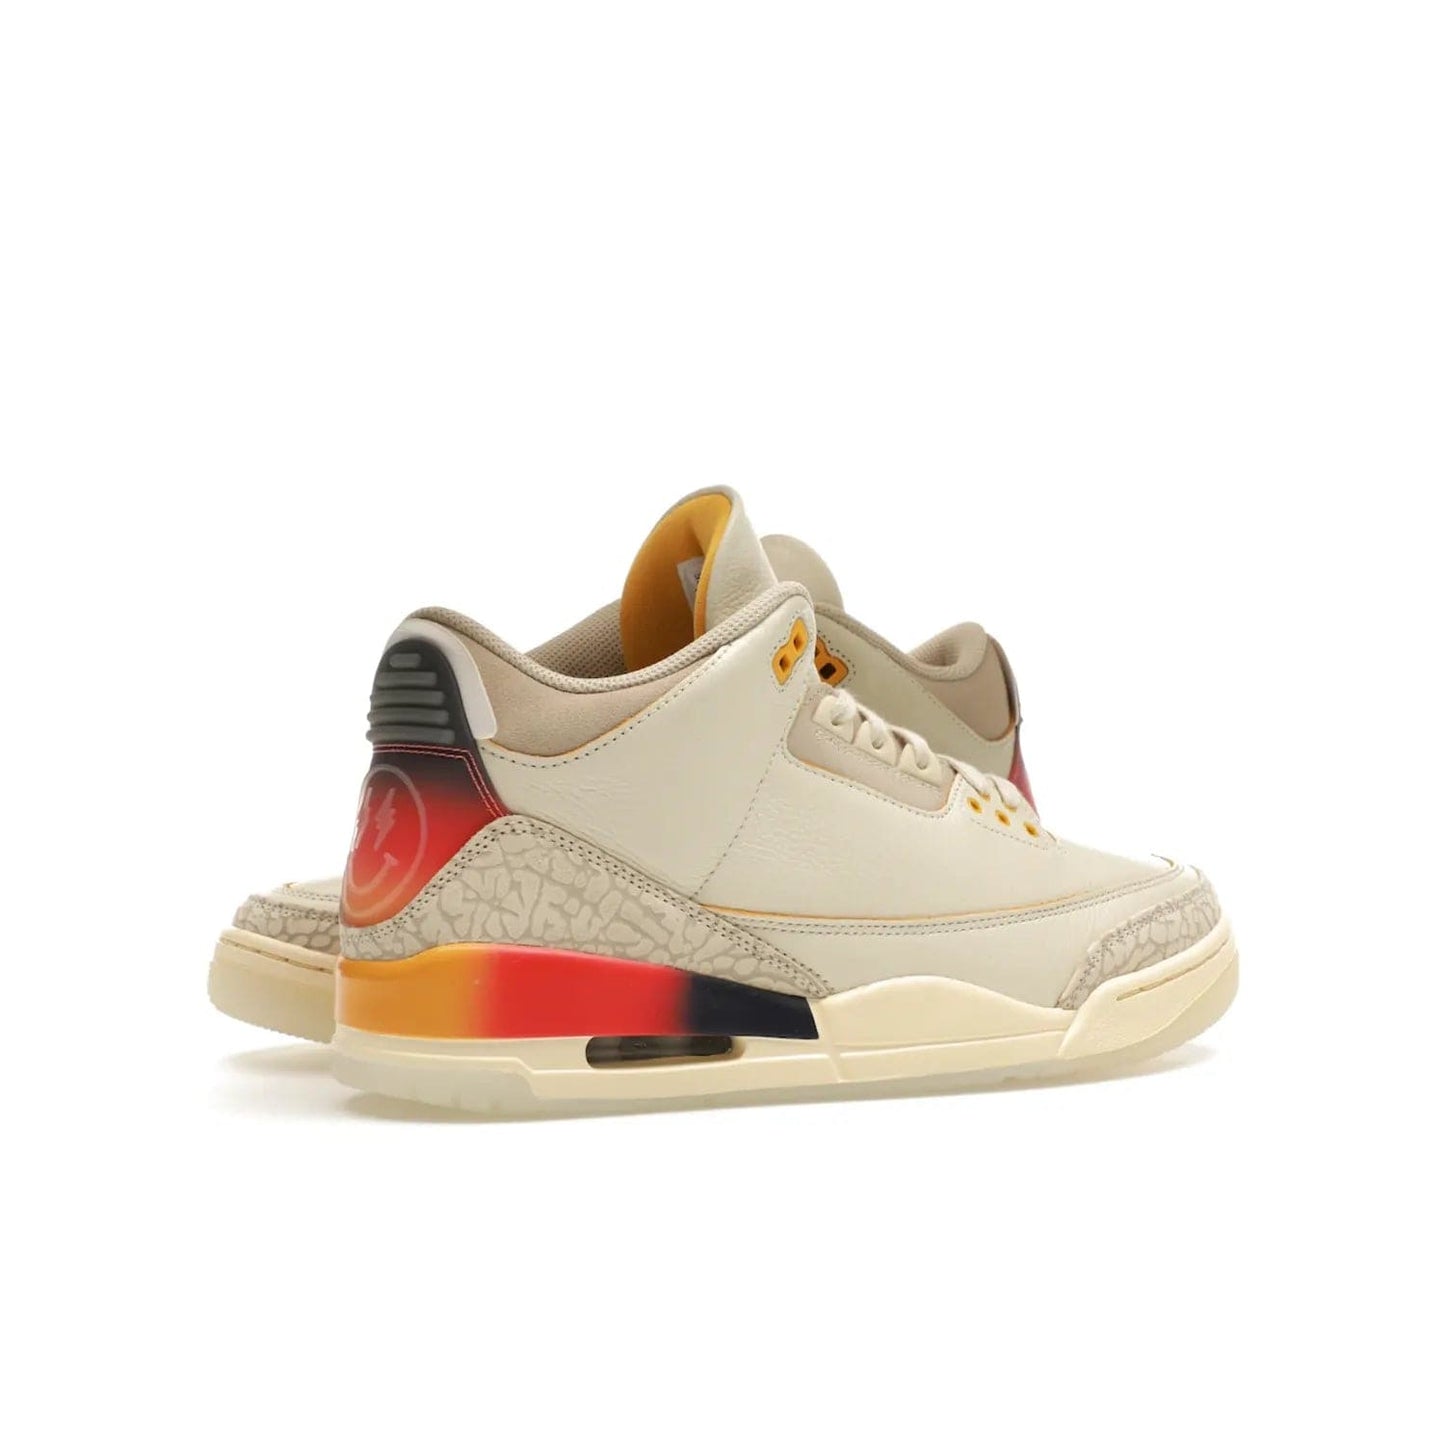 Jordan 3 Retro SP J Balvin Medellín Sunset - Image 34 - Only at www.BallersClubKickz.com - J Balvin x Jordan 3 Retro SP: Celebrate the joy of life with a colorful, homage to the electrifying reggaeton culture and iconic Jordan 3. Limited edition, Sept. 23. $250.